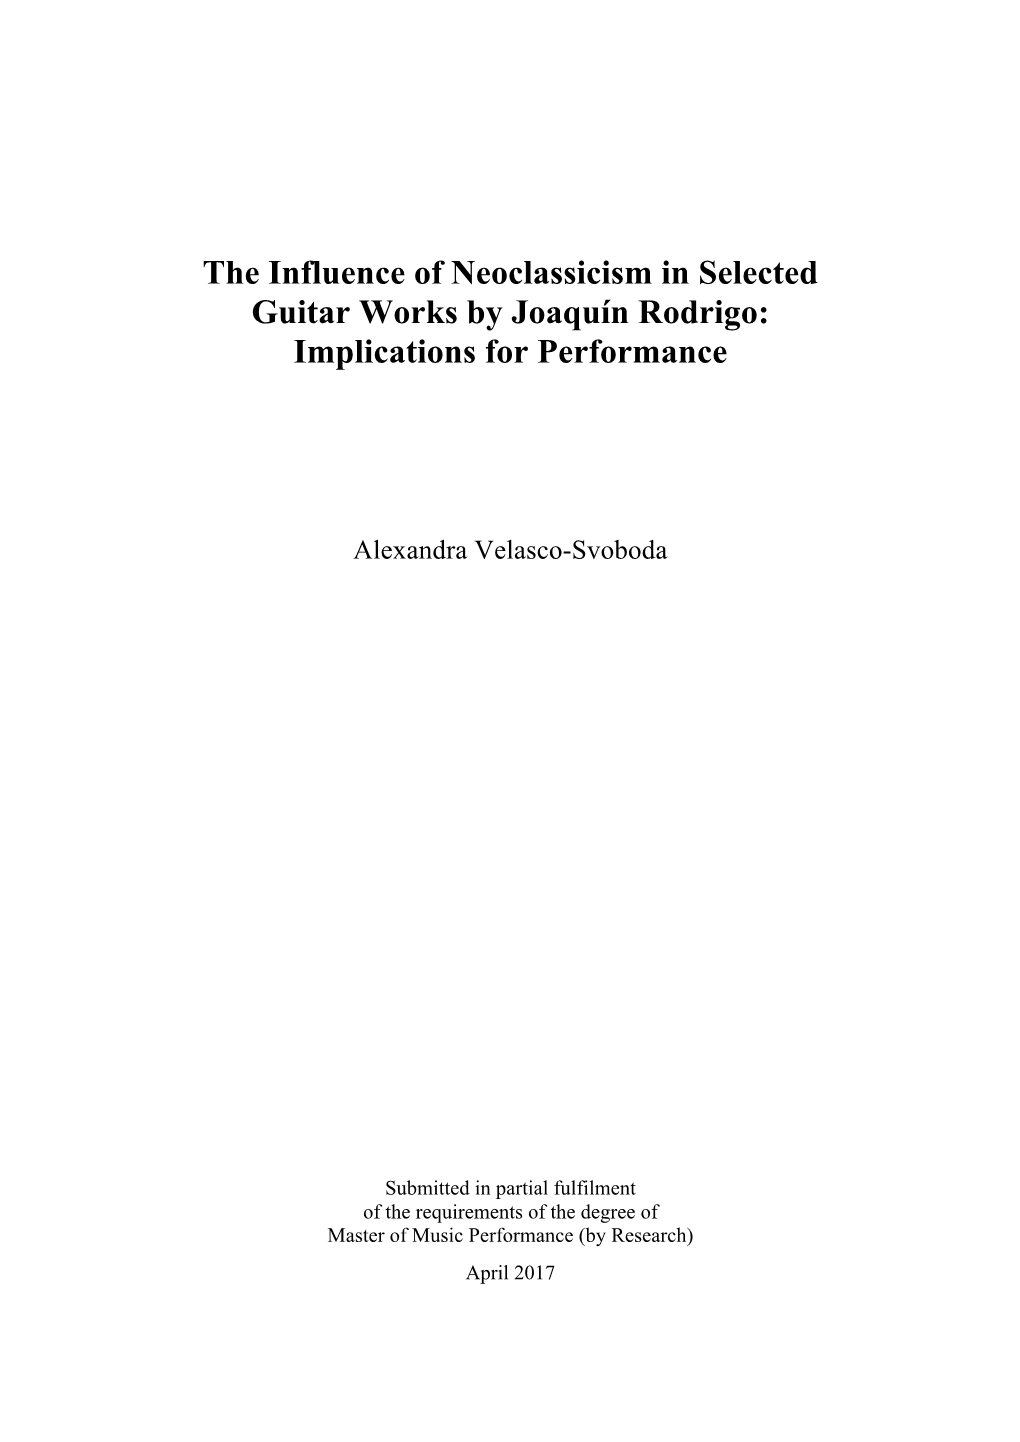 The Influence of Neoclassicism in Selected Guitar Works by Joaquín Rodrigo: Implications for Performance